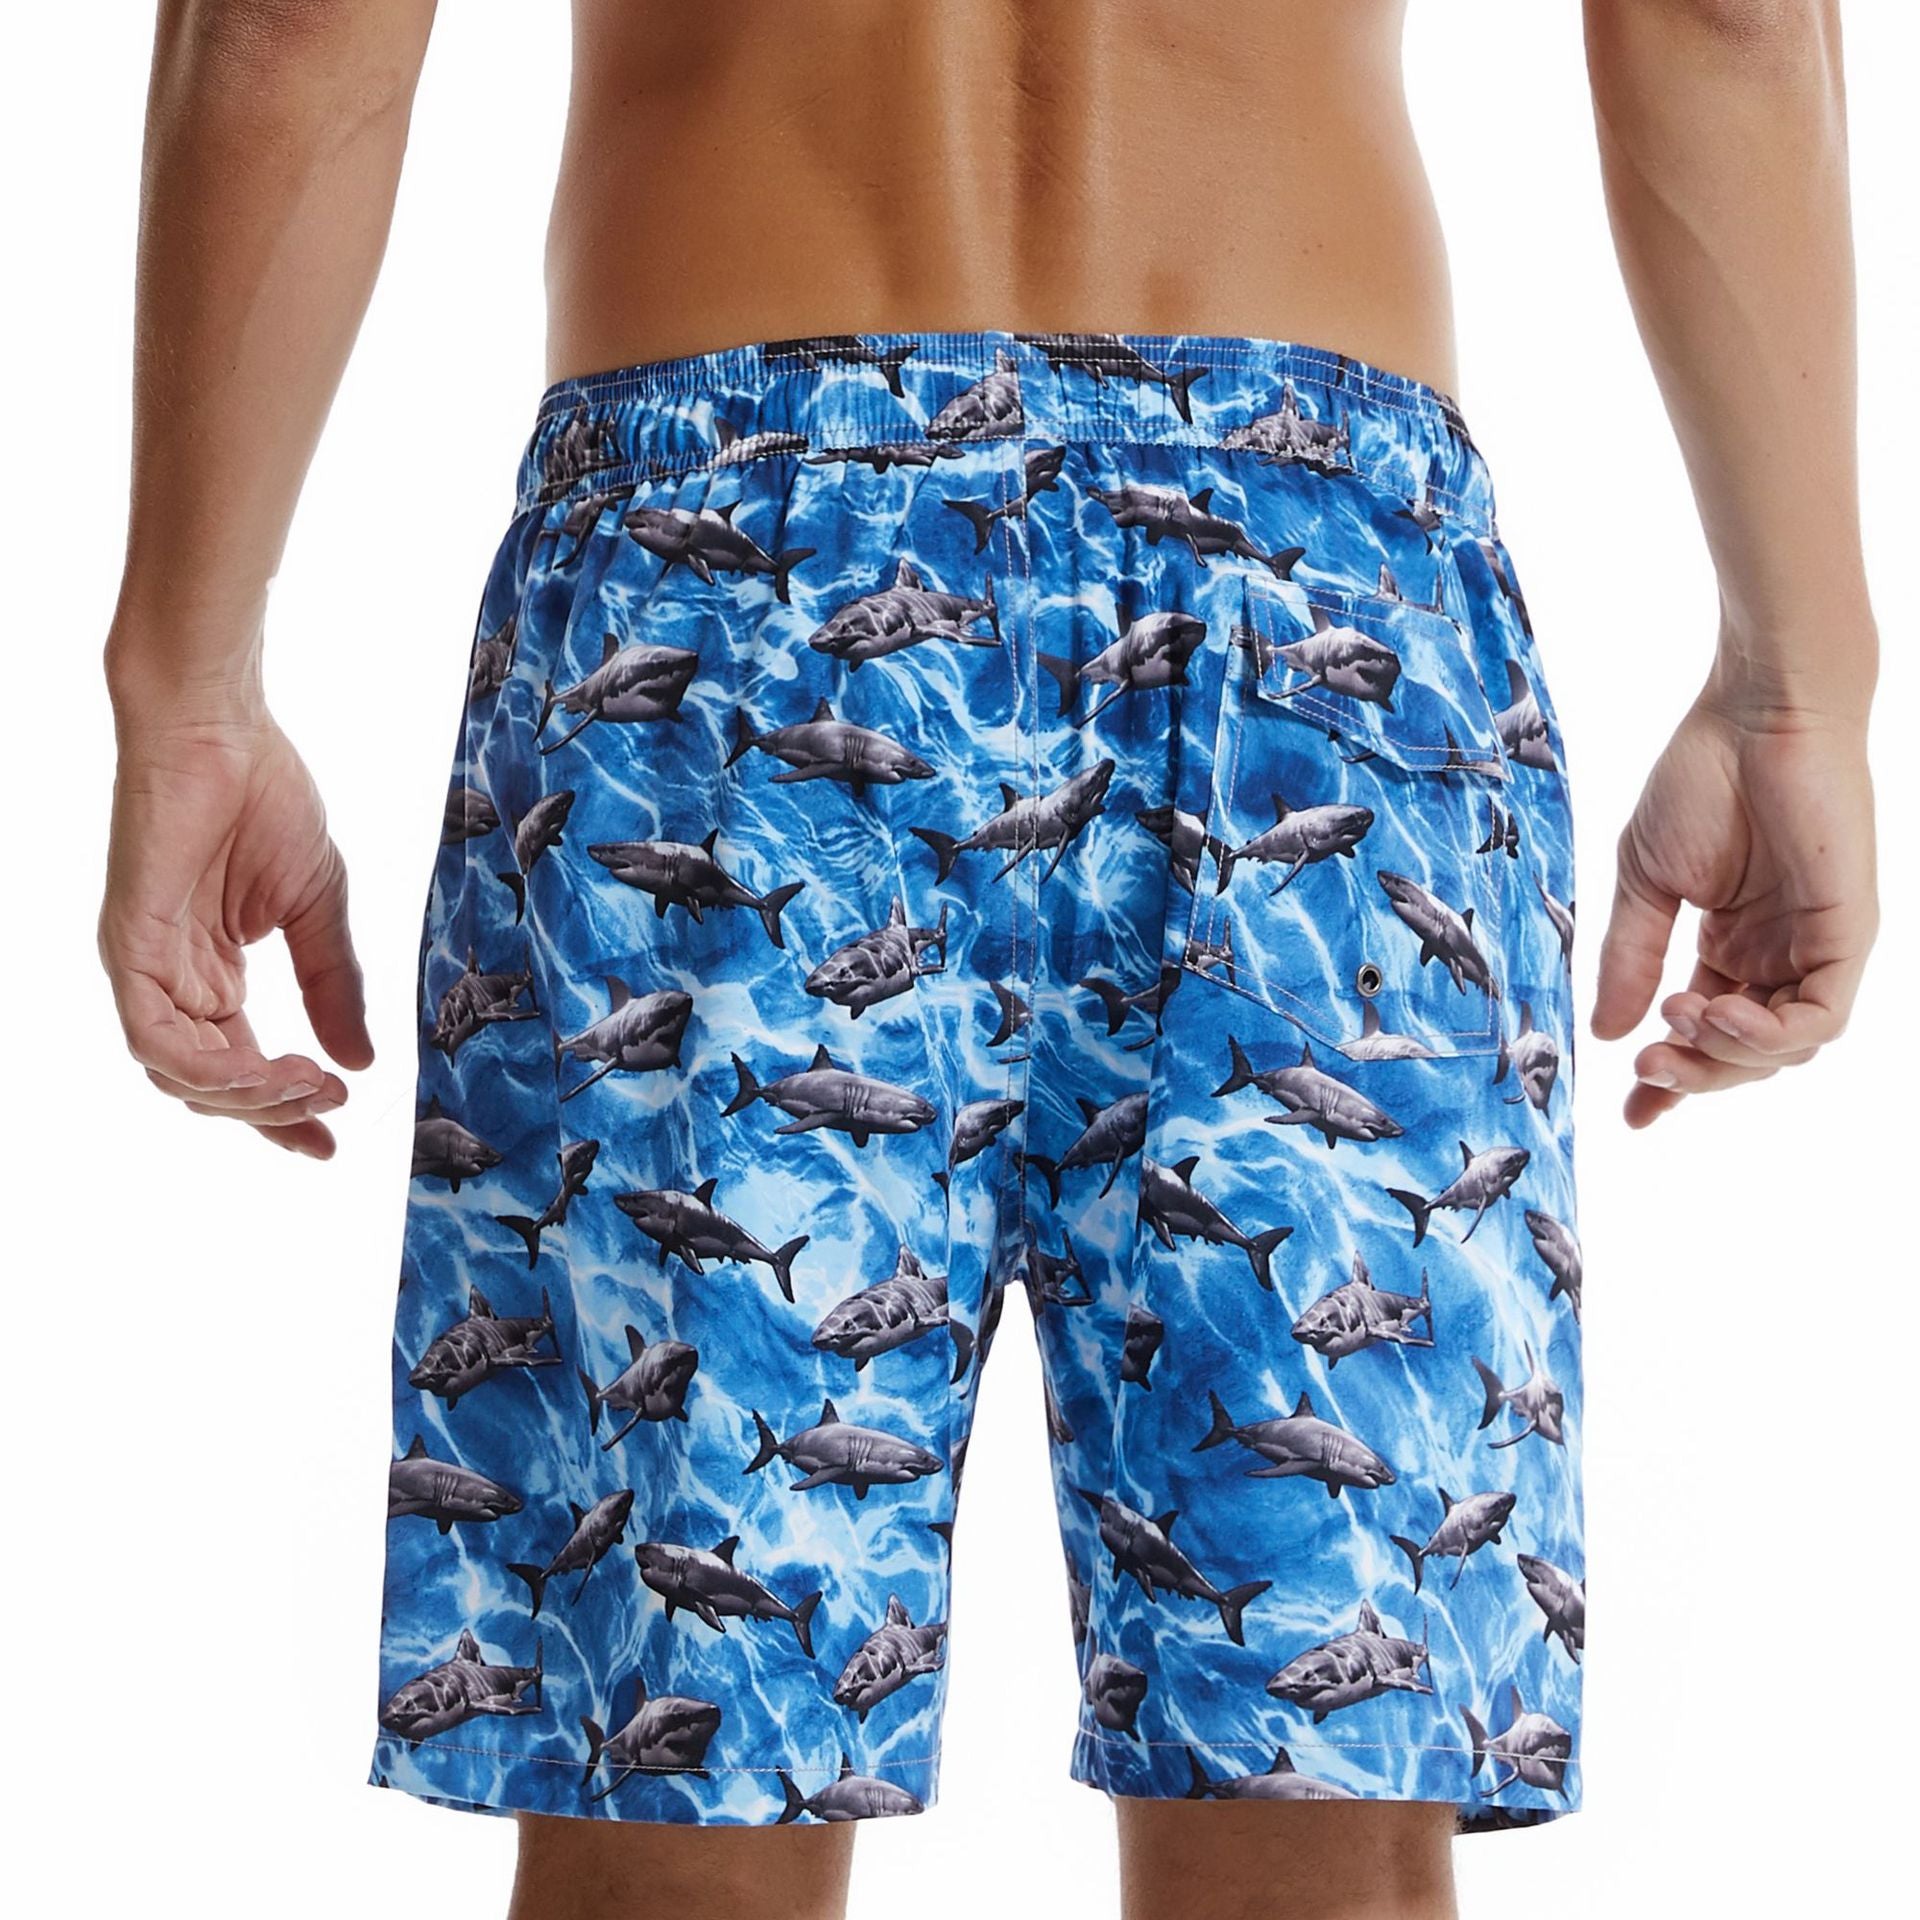 Men's Swim Trunks with Compression Liner Quick Dry 7" Inseam Swimsuit Swimwear - Sharks